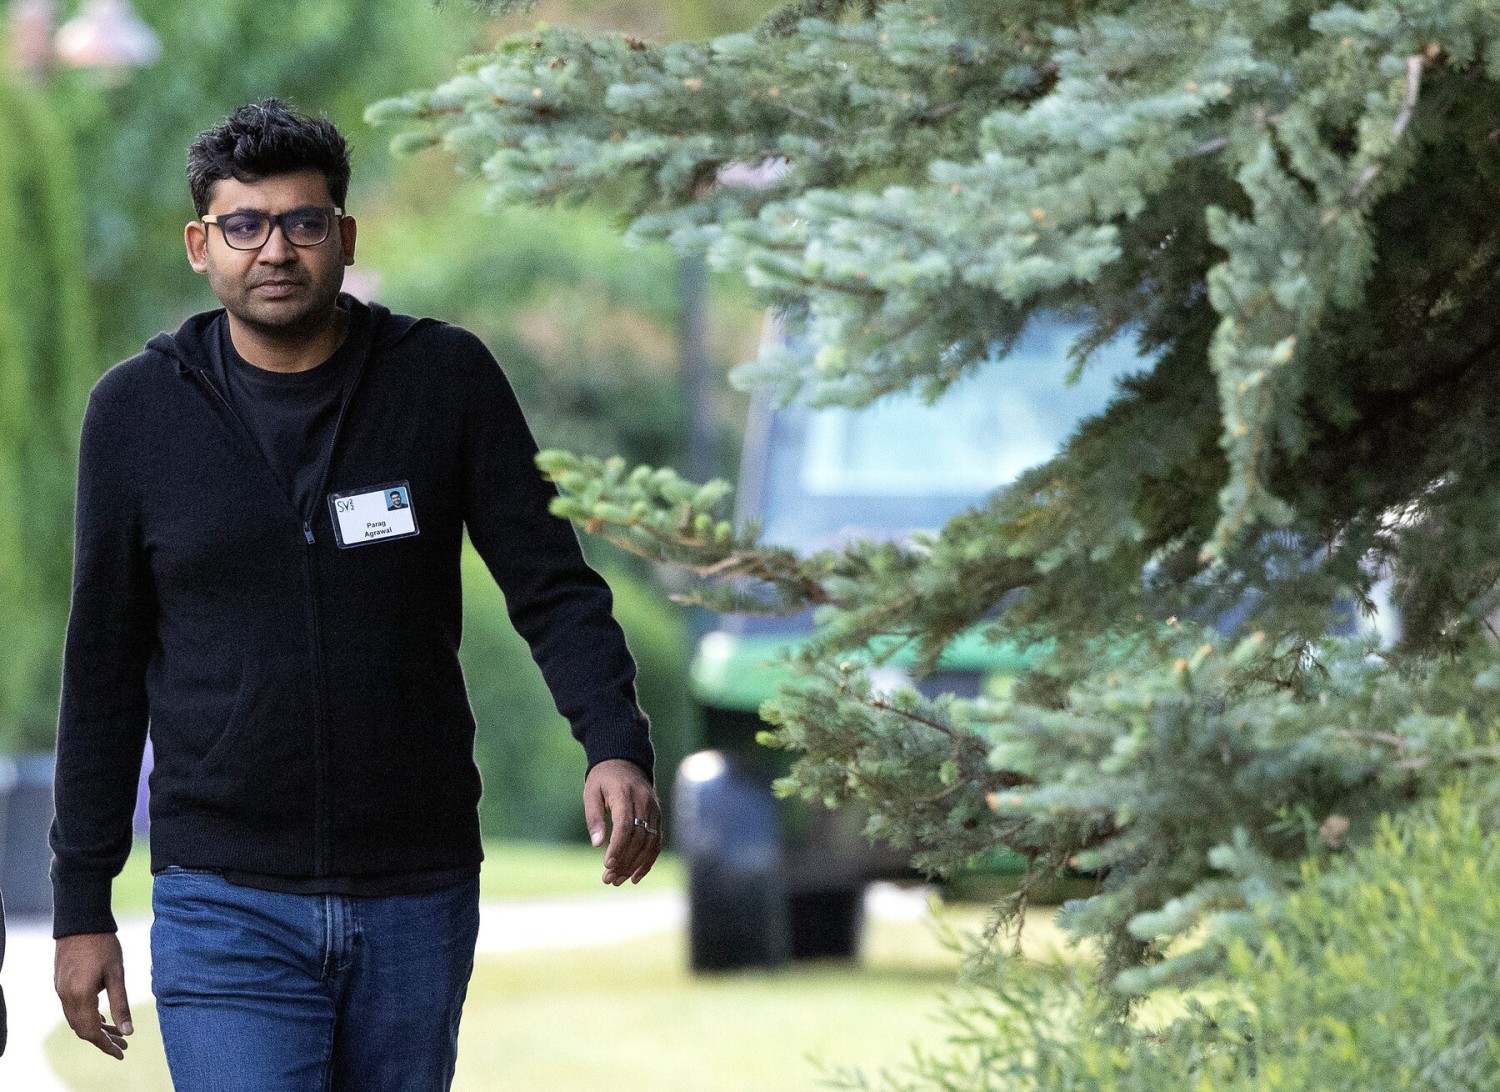  Parag Agrawal became the CEO of Twitter in late 2021. He clashed with the head of security, Peiter Zatko, who filed a whistleblower complaint in July. (Kevin Dietsch/Getty Images)